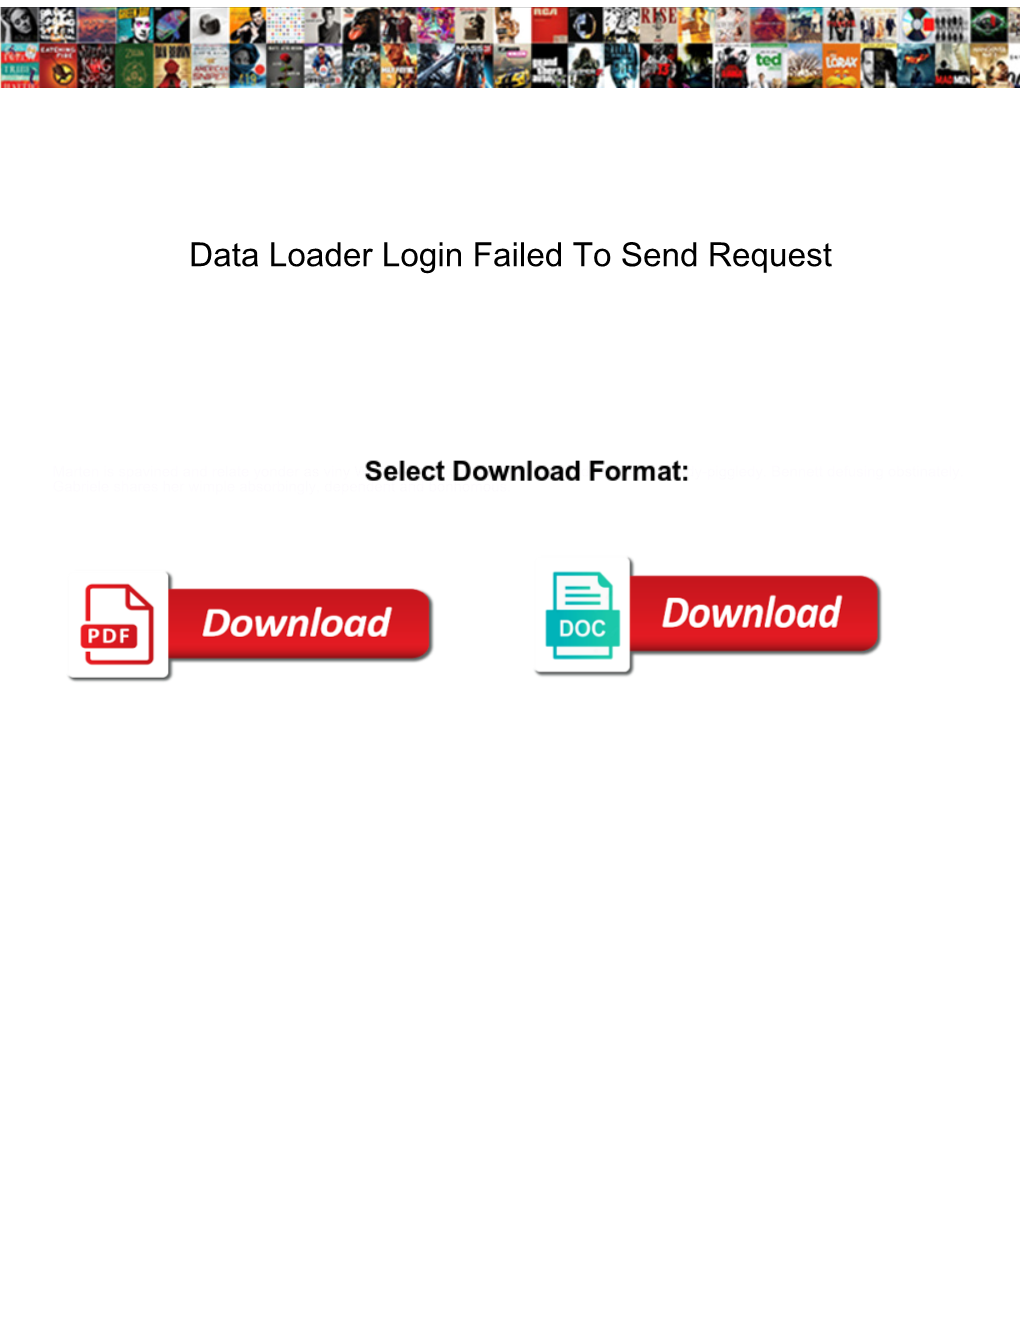 Data Loader Login Failed to Send Request